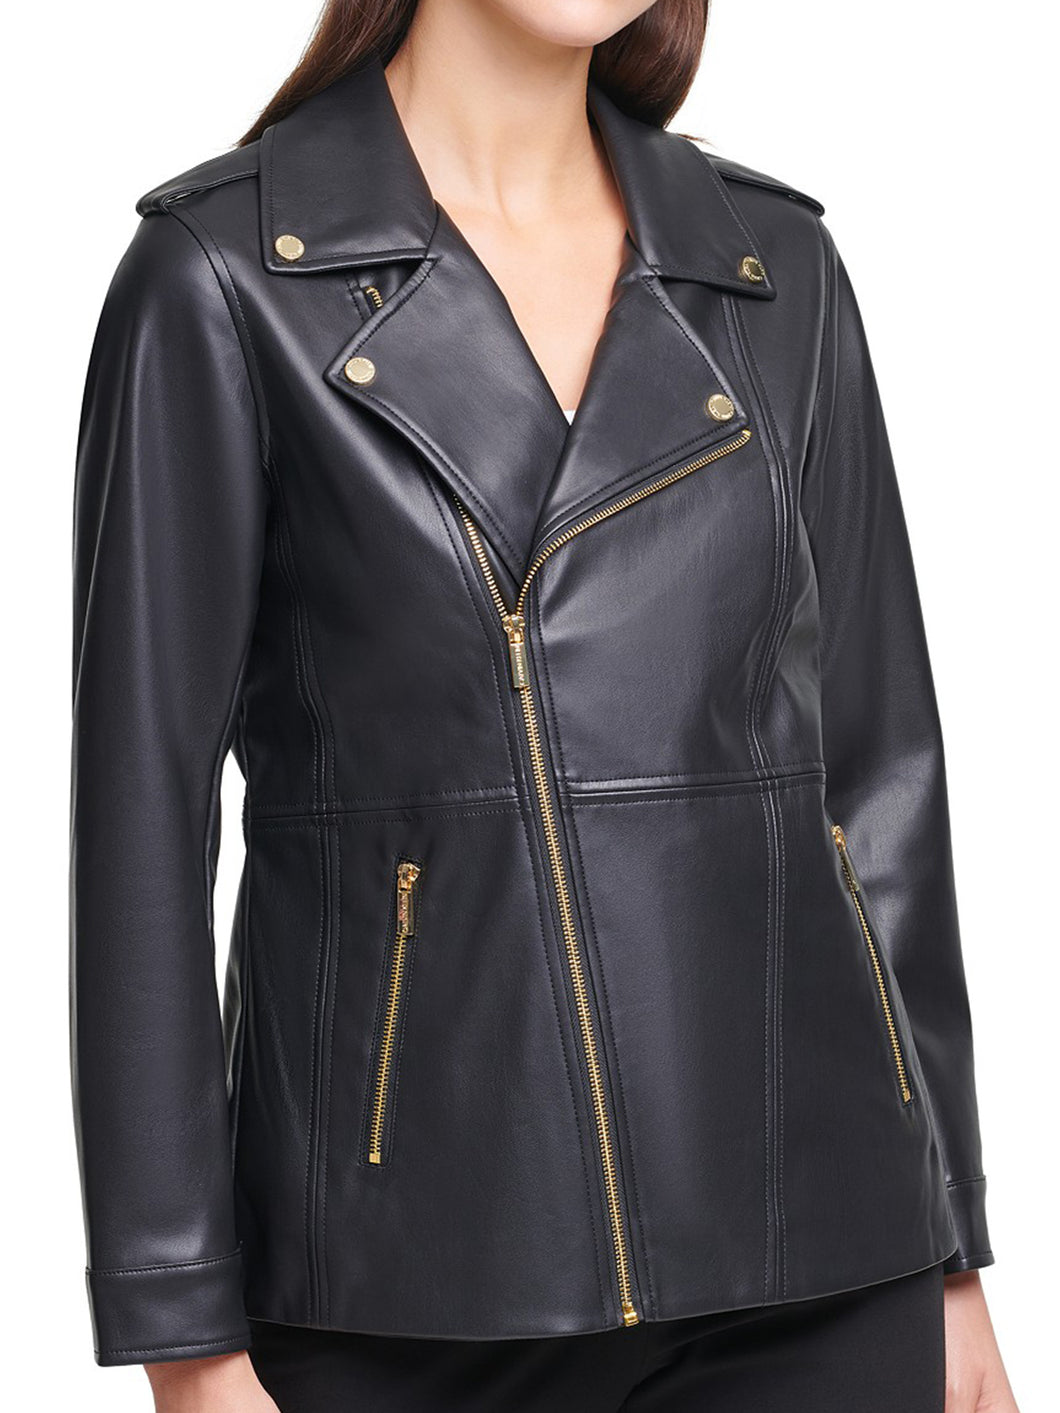 Womens New Asymmetrical Motercycle Leather Jacket